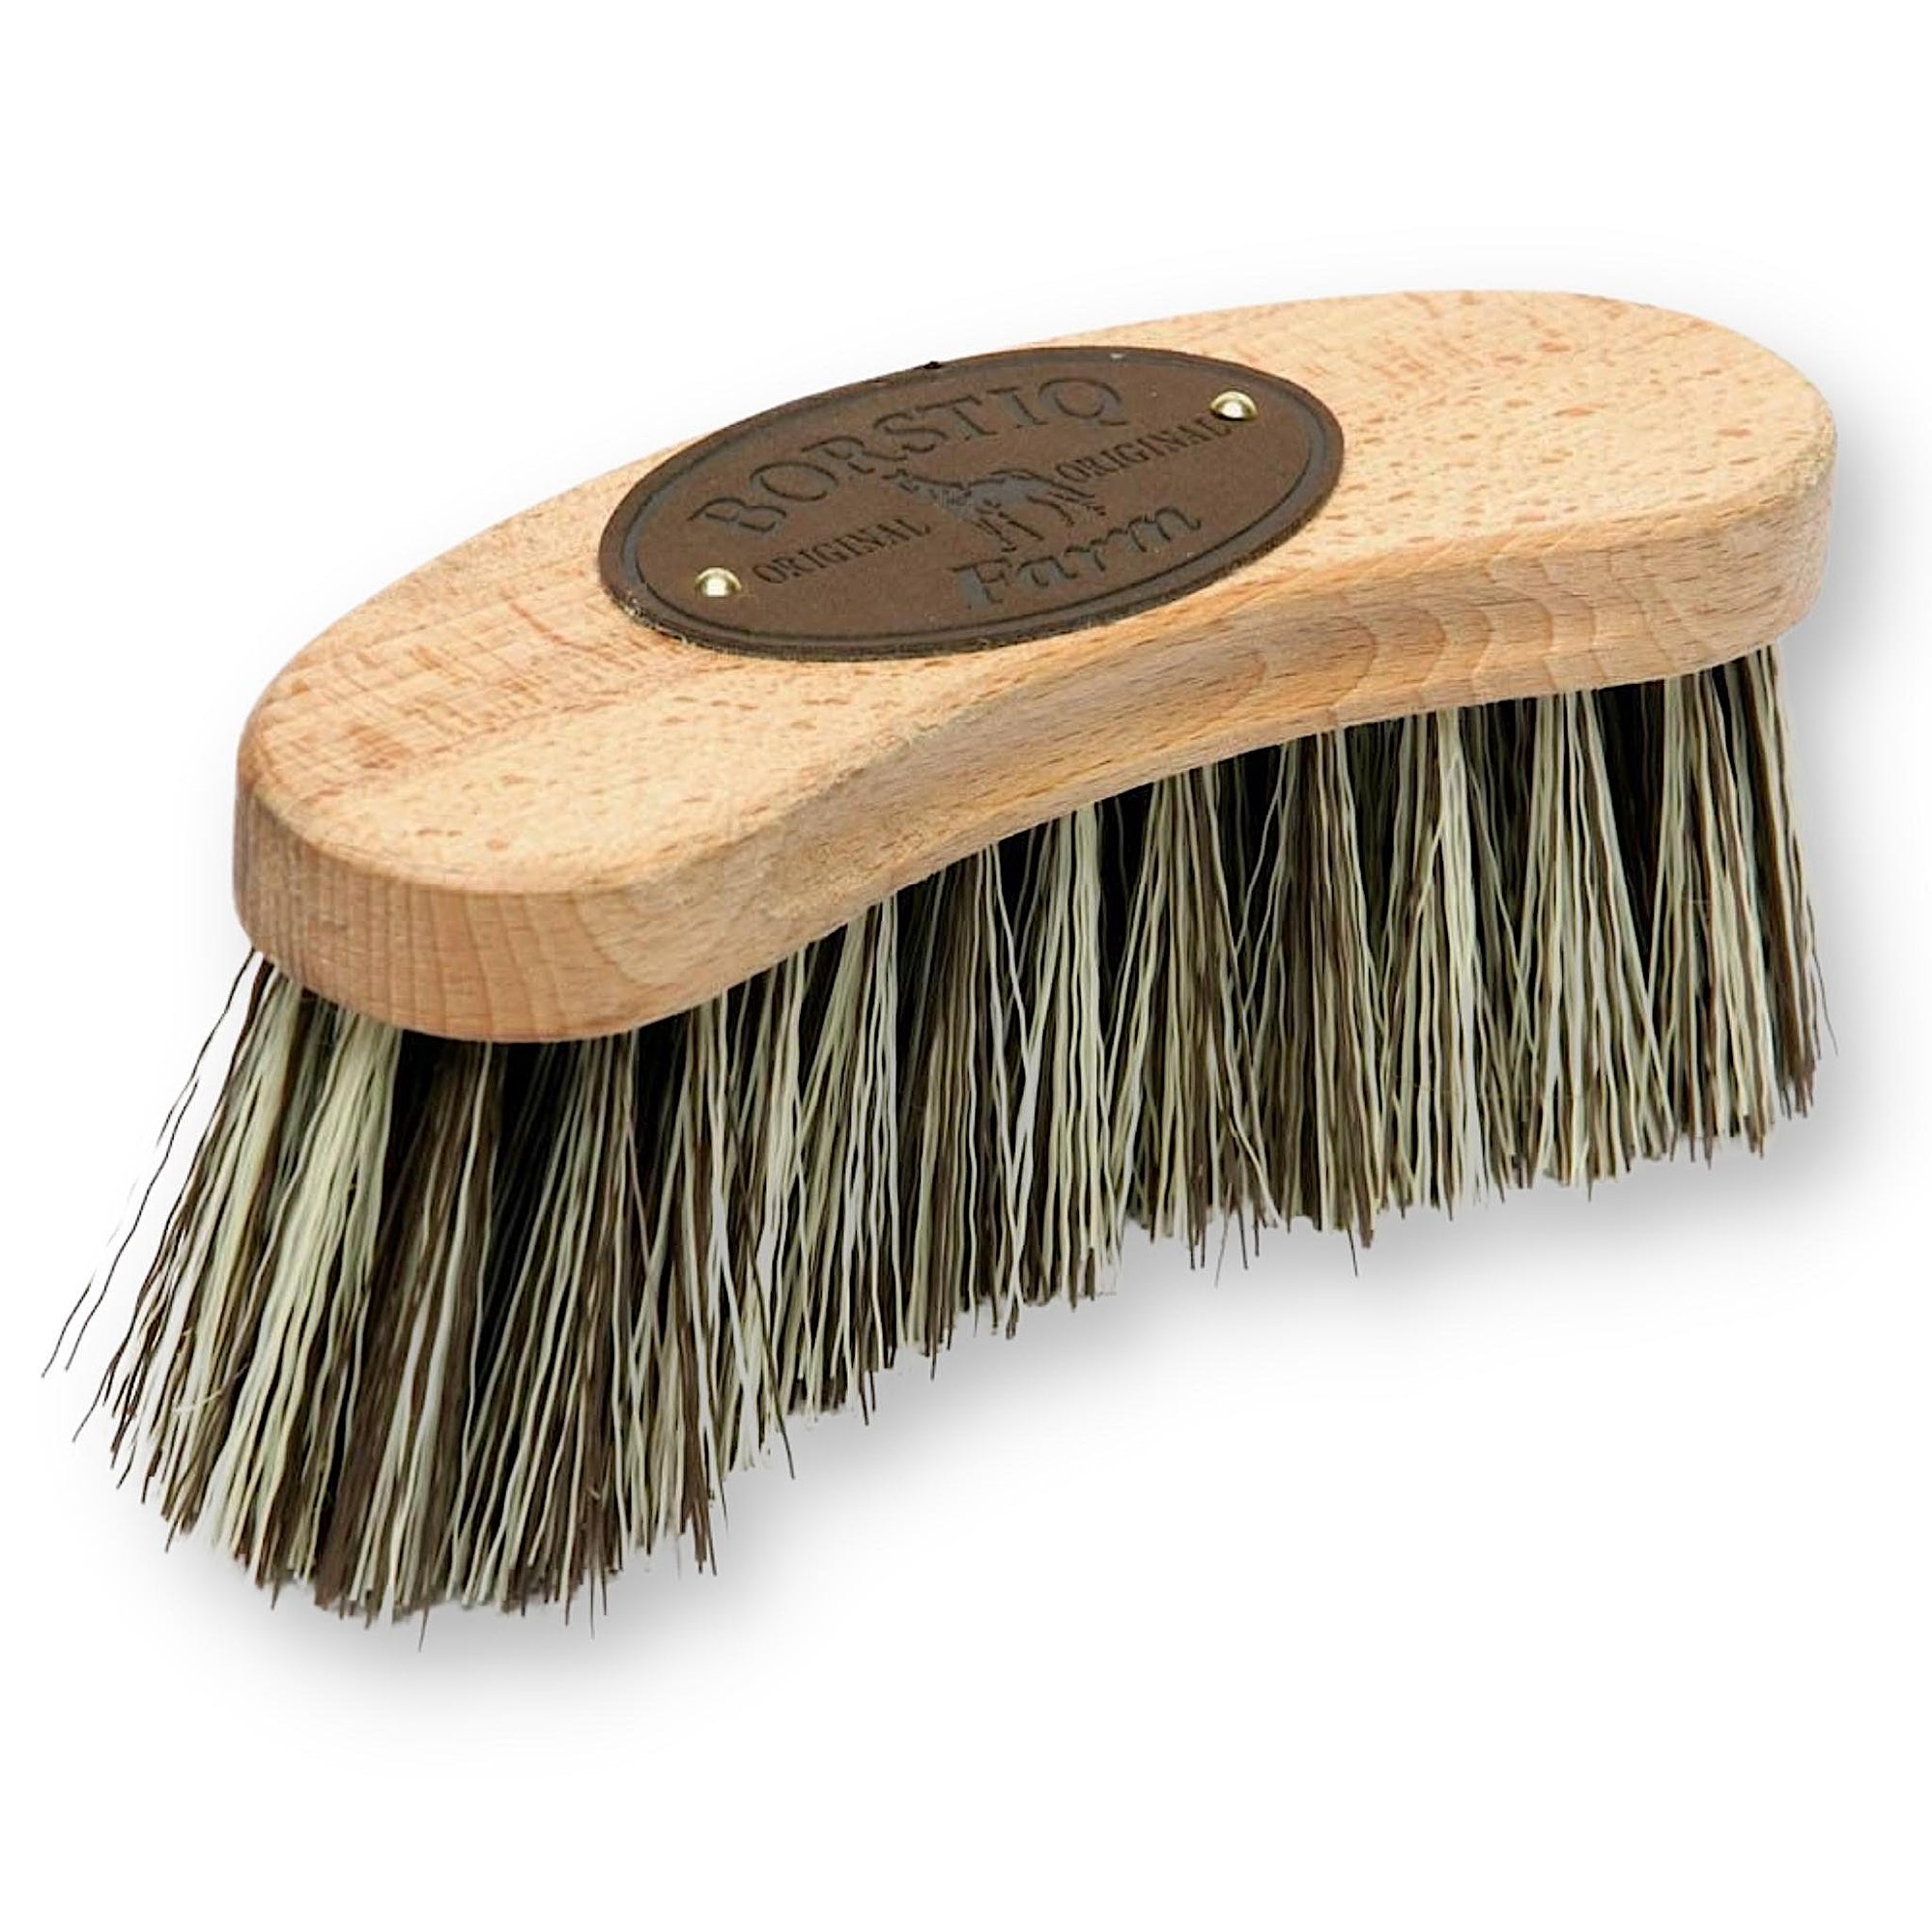 wooden curved brush with a leather logo and white and brown bristles. 